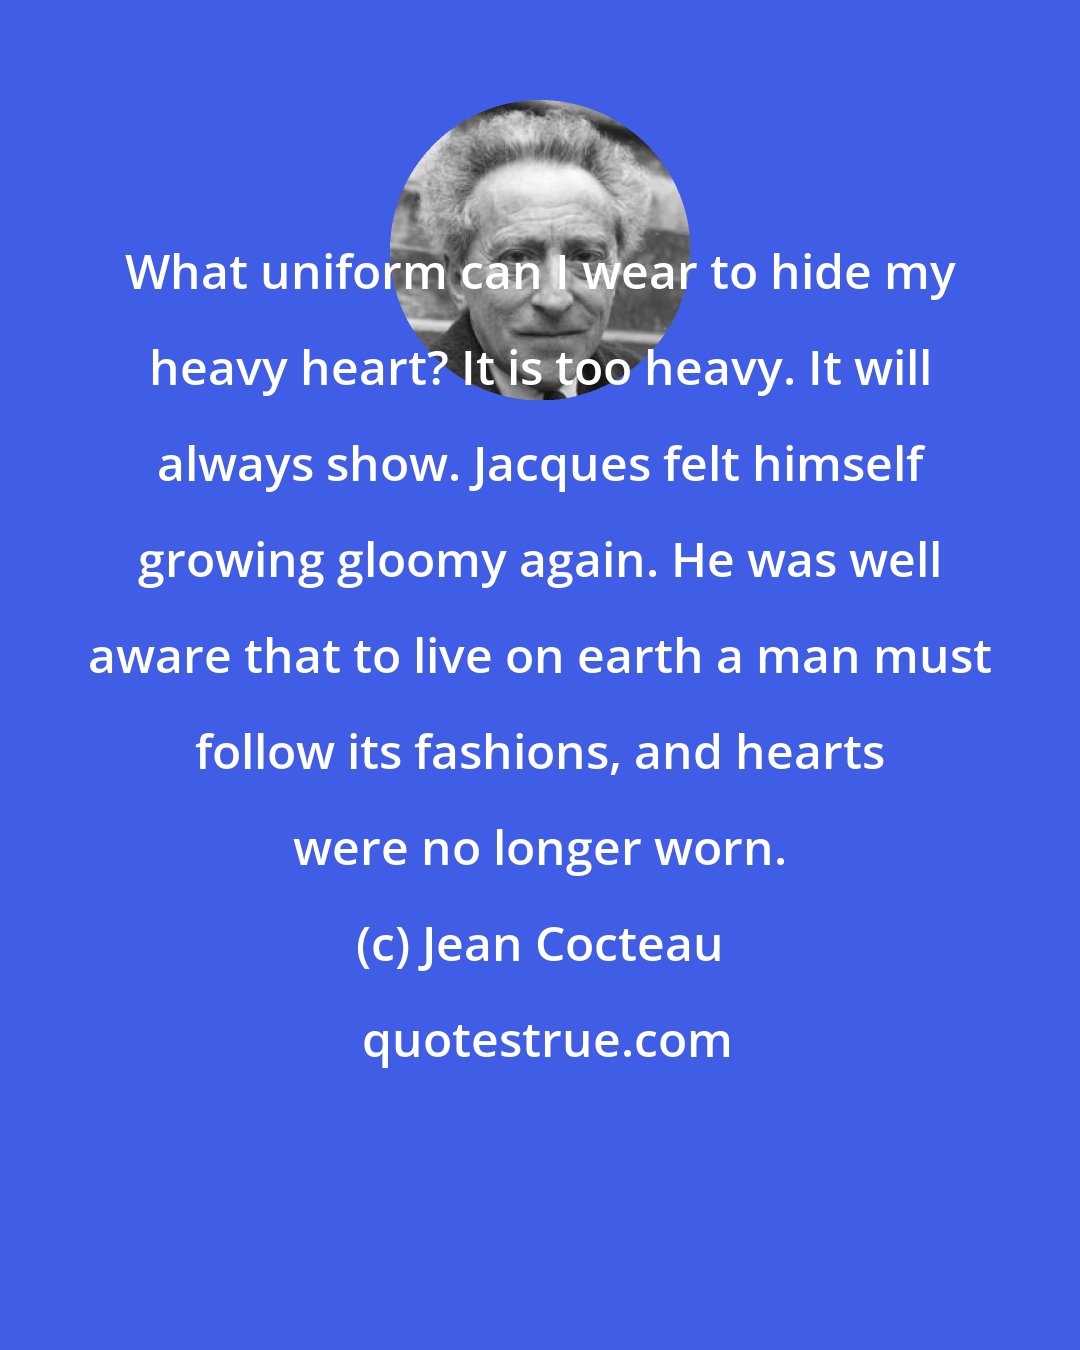 Jean Cocteau: What uniform can I wear to hide my heavy heart? It is too heavy. It will always show. Jacques felt himself growing gloomy again. He was well aware that to live on earth a man must follow its fashions, and hearts were no longer worn.